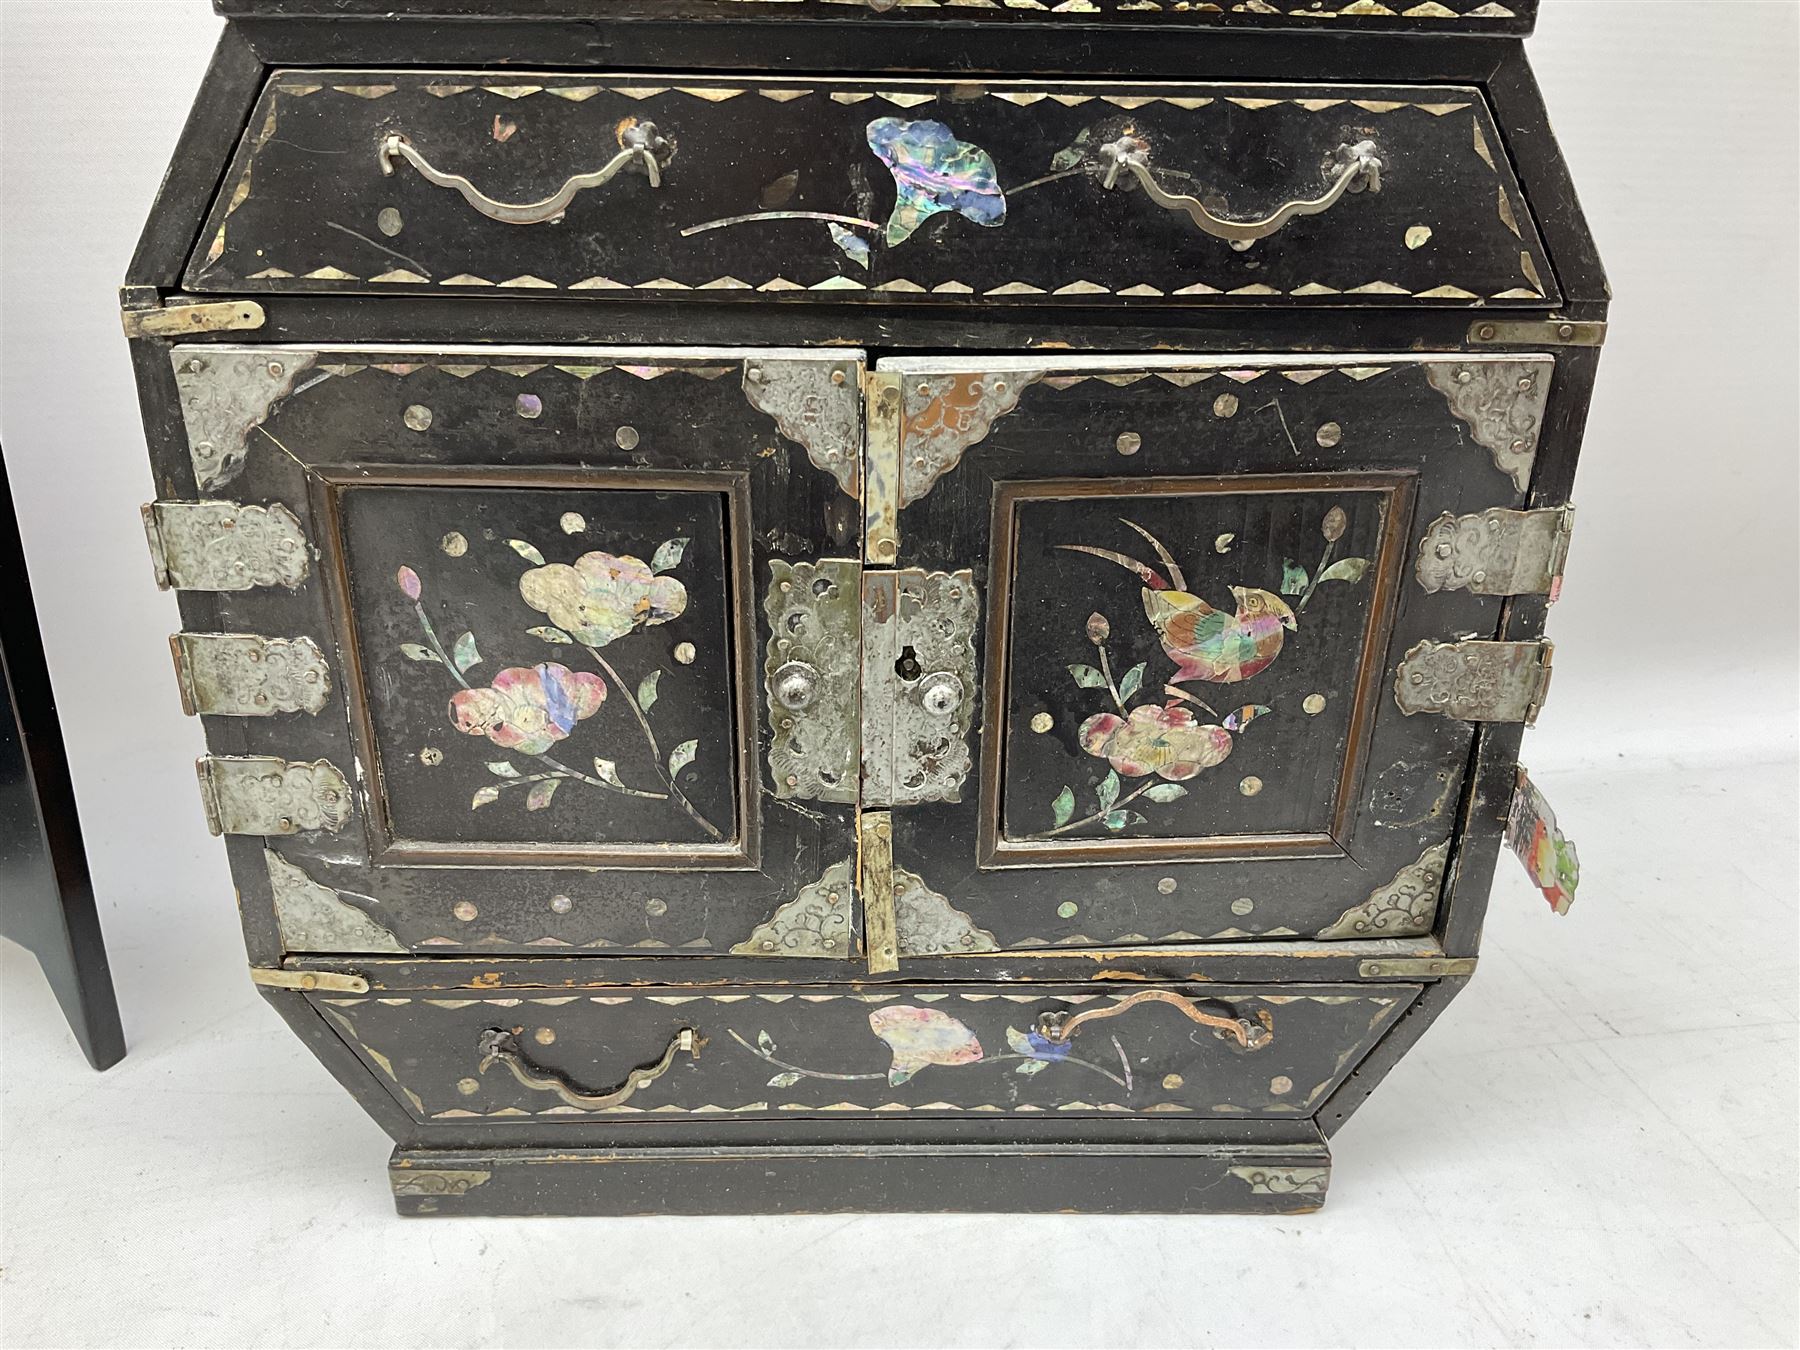 Late 19th / early 20th century Japanese lacquered table top cabinet - Image 2 of 16